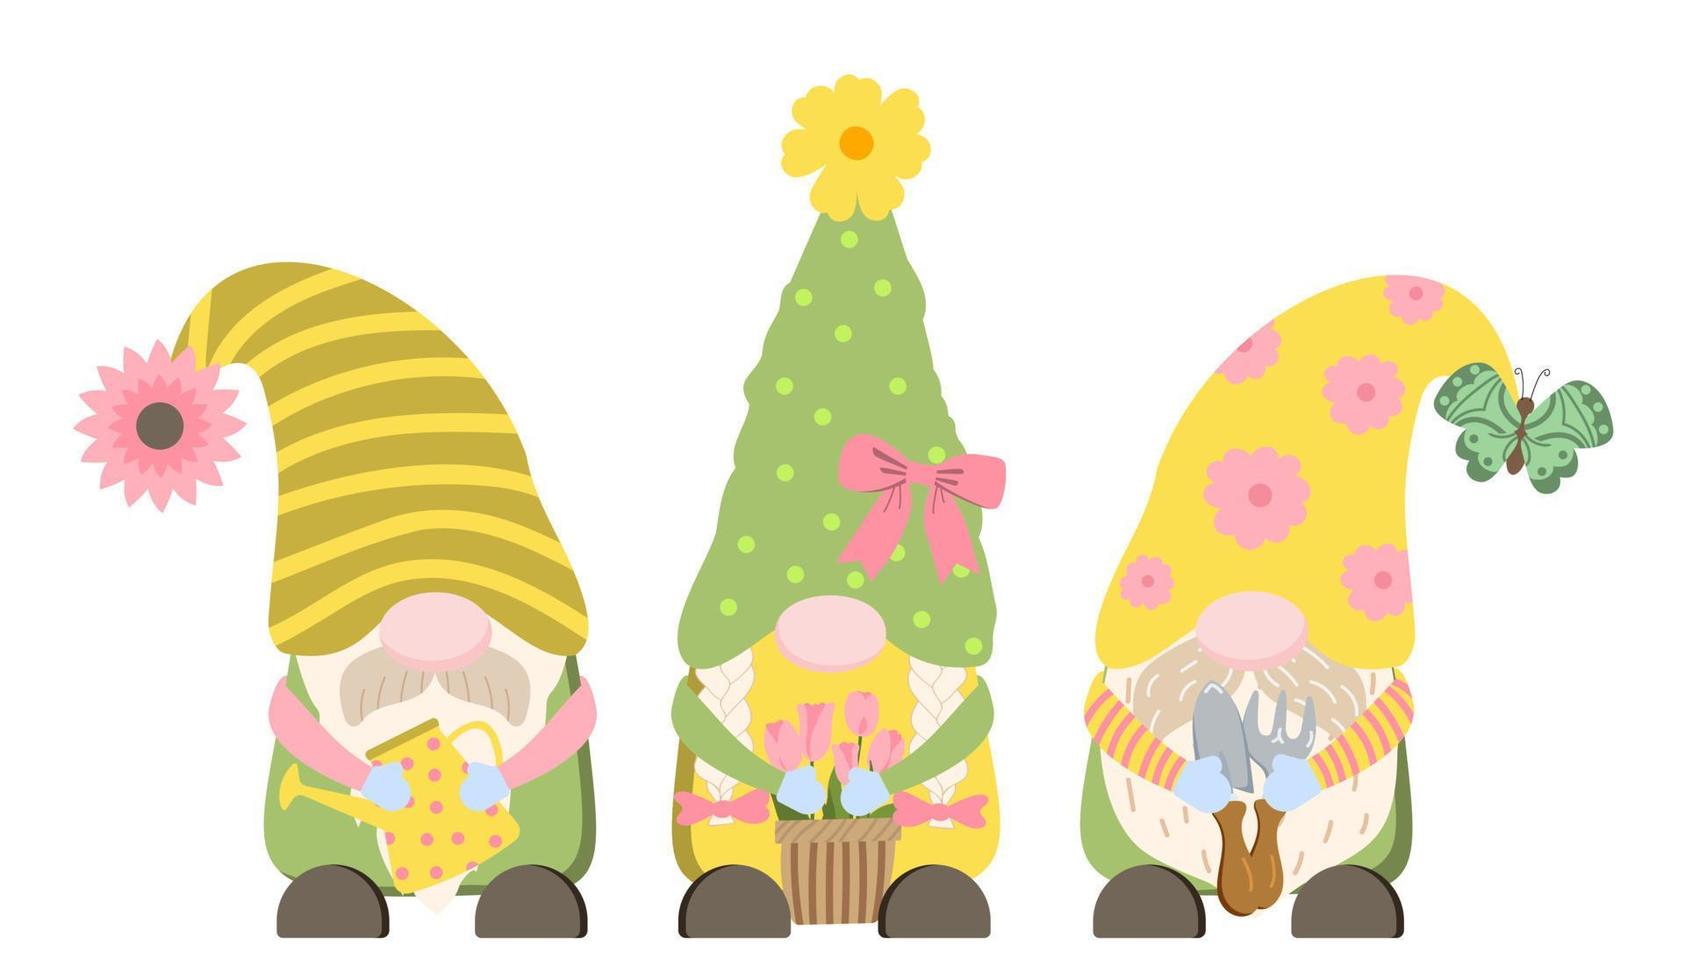 Cute cartoon spring gardening gnomes holding watering can, flowers in a basket, gardening tools. Isolated on white background. Spring gardening banner design. vector